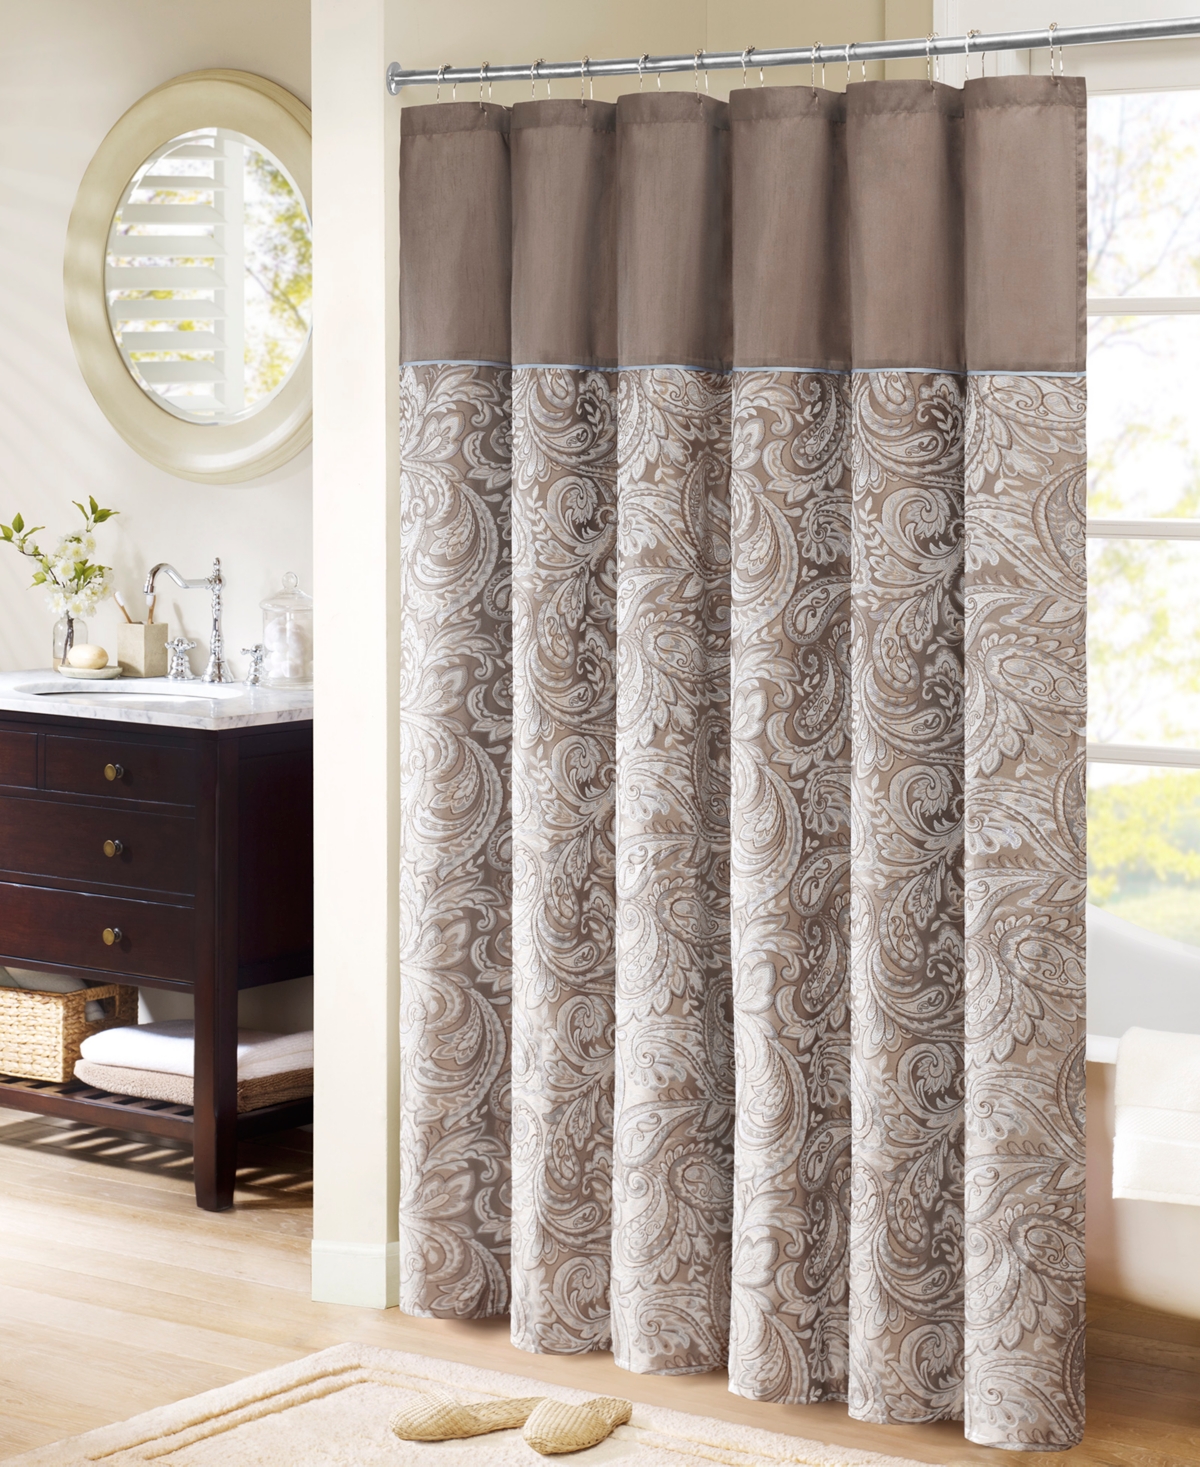 Madison Park Aubrey Jacquard Beaded Shower Curtain, 72" X 72" In Blue,brown